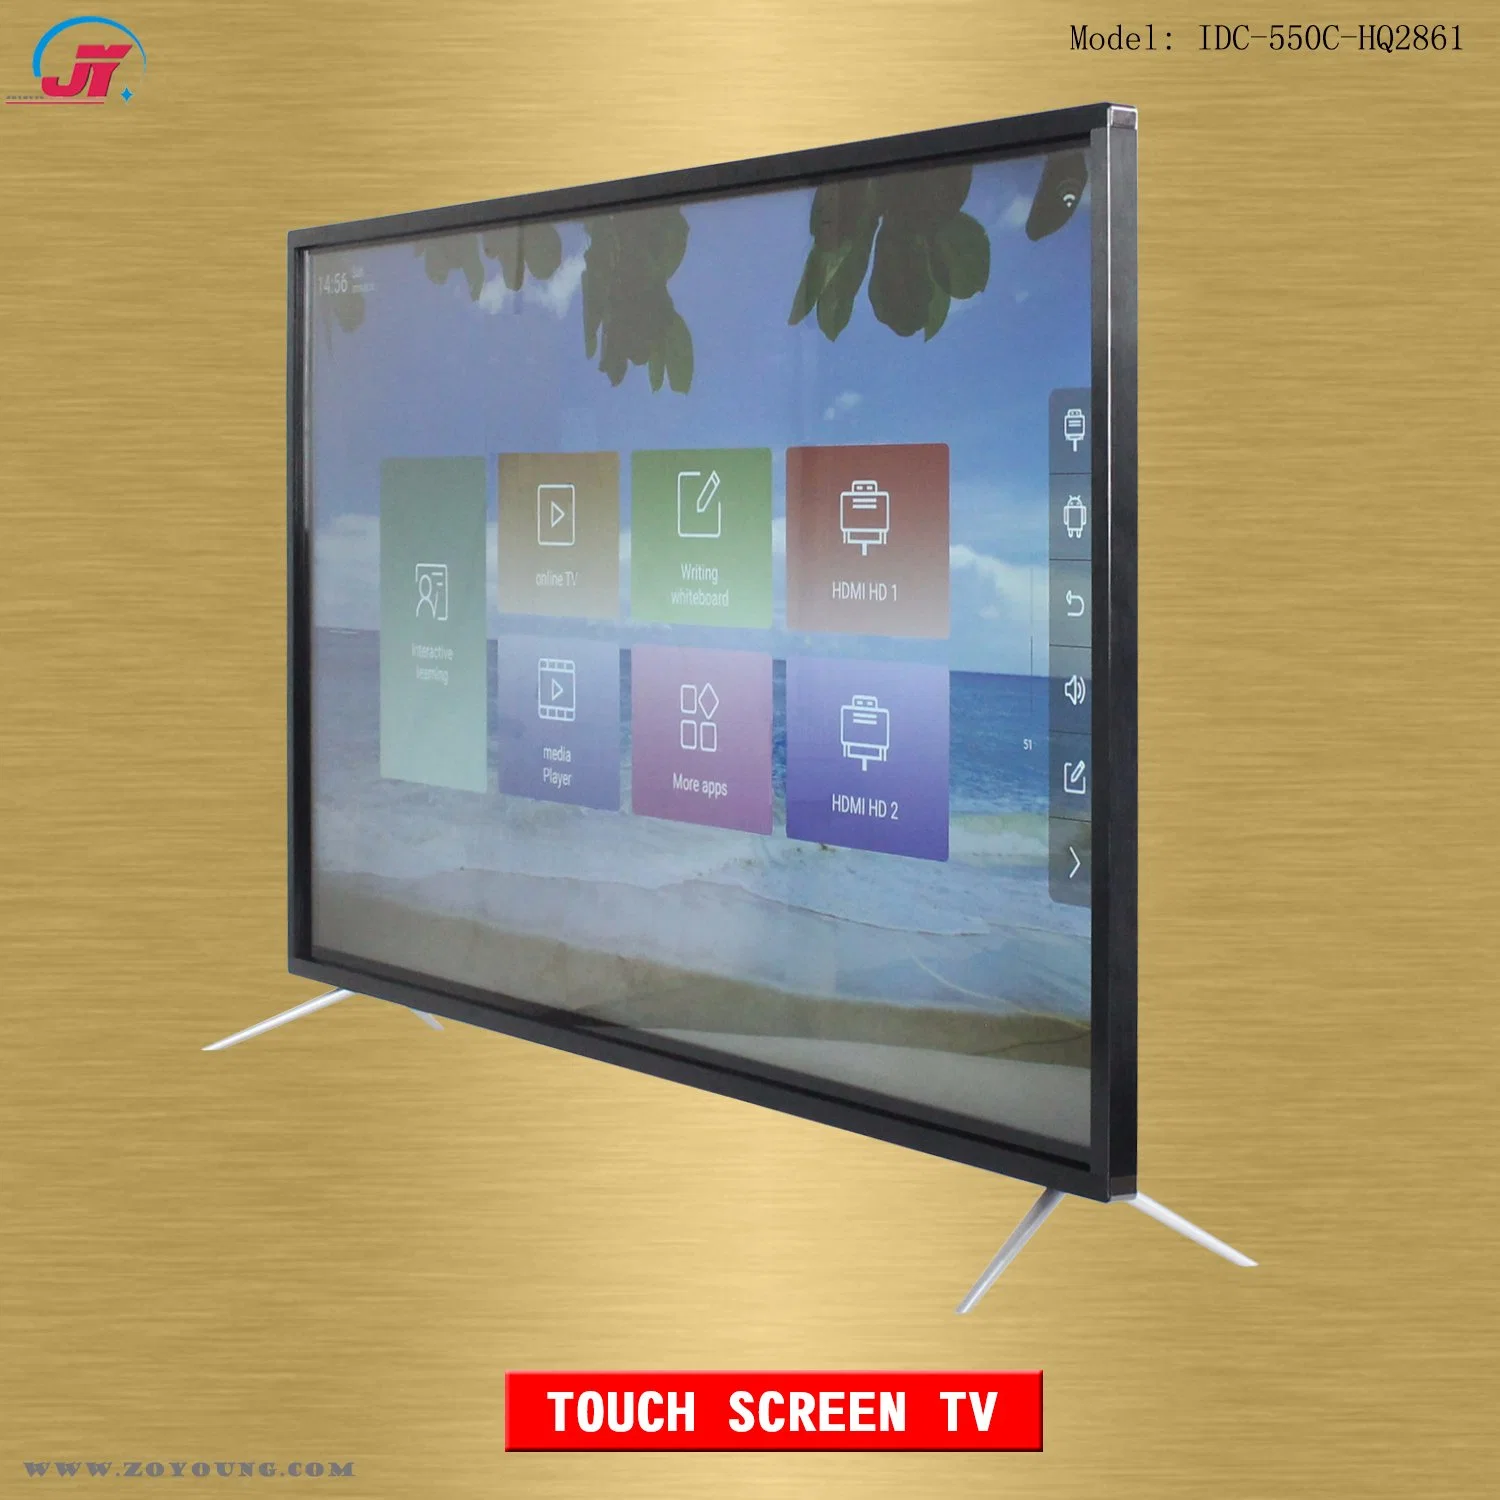 55 Inch Interactive Touch Screen Smart TV and Electronic Whiteboard Display Equipment for Meeting Conference and Classroom Teaching Education (HQRT2861)